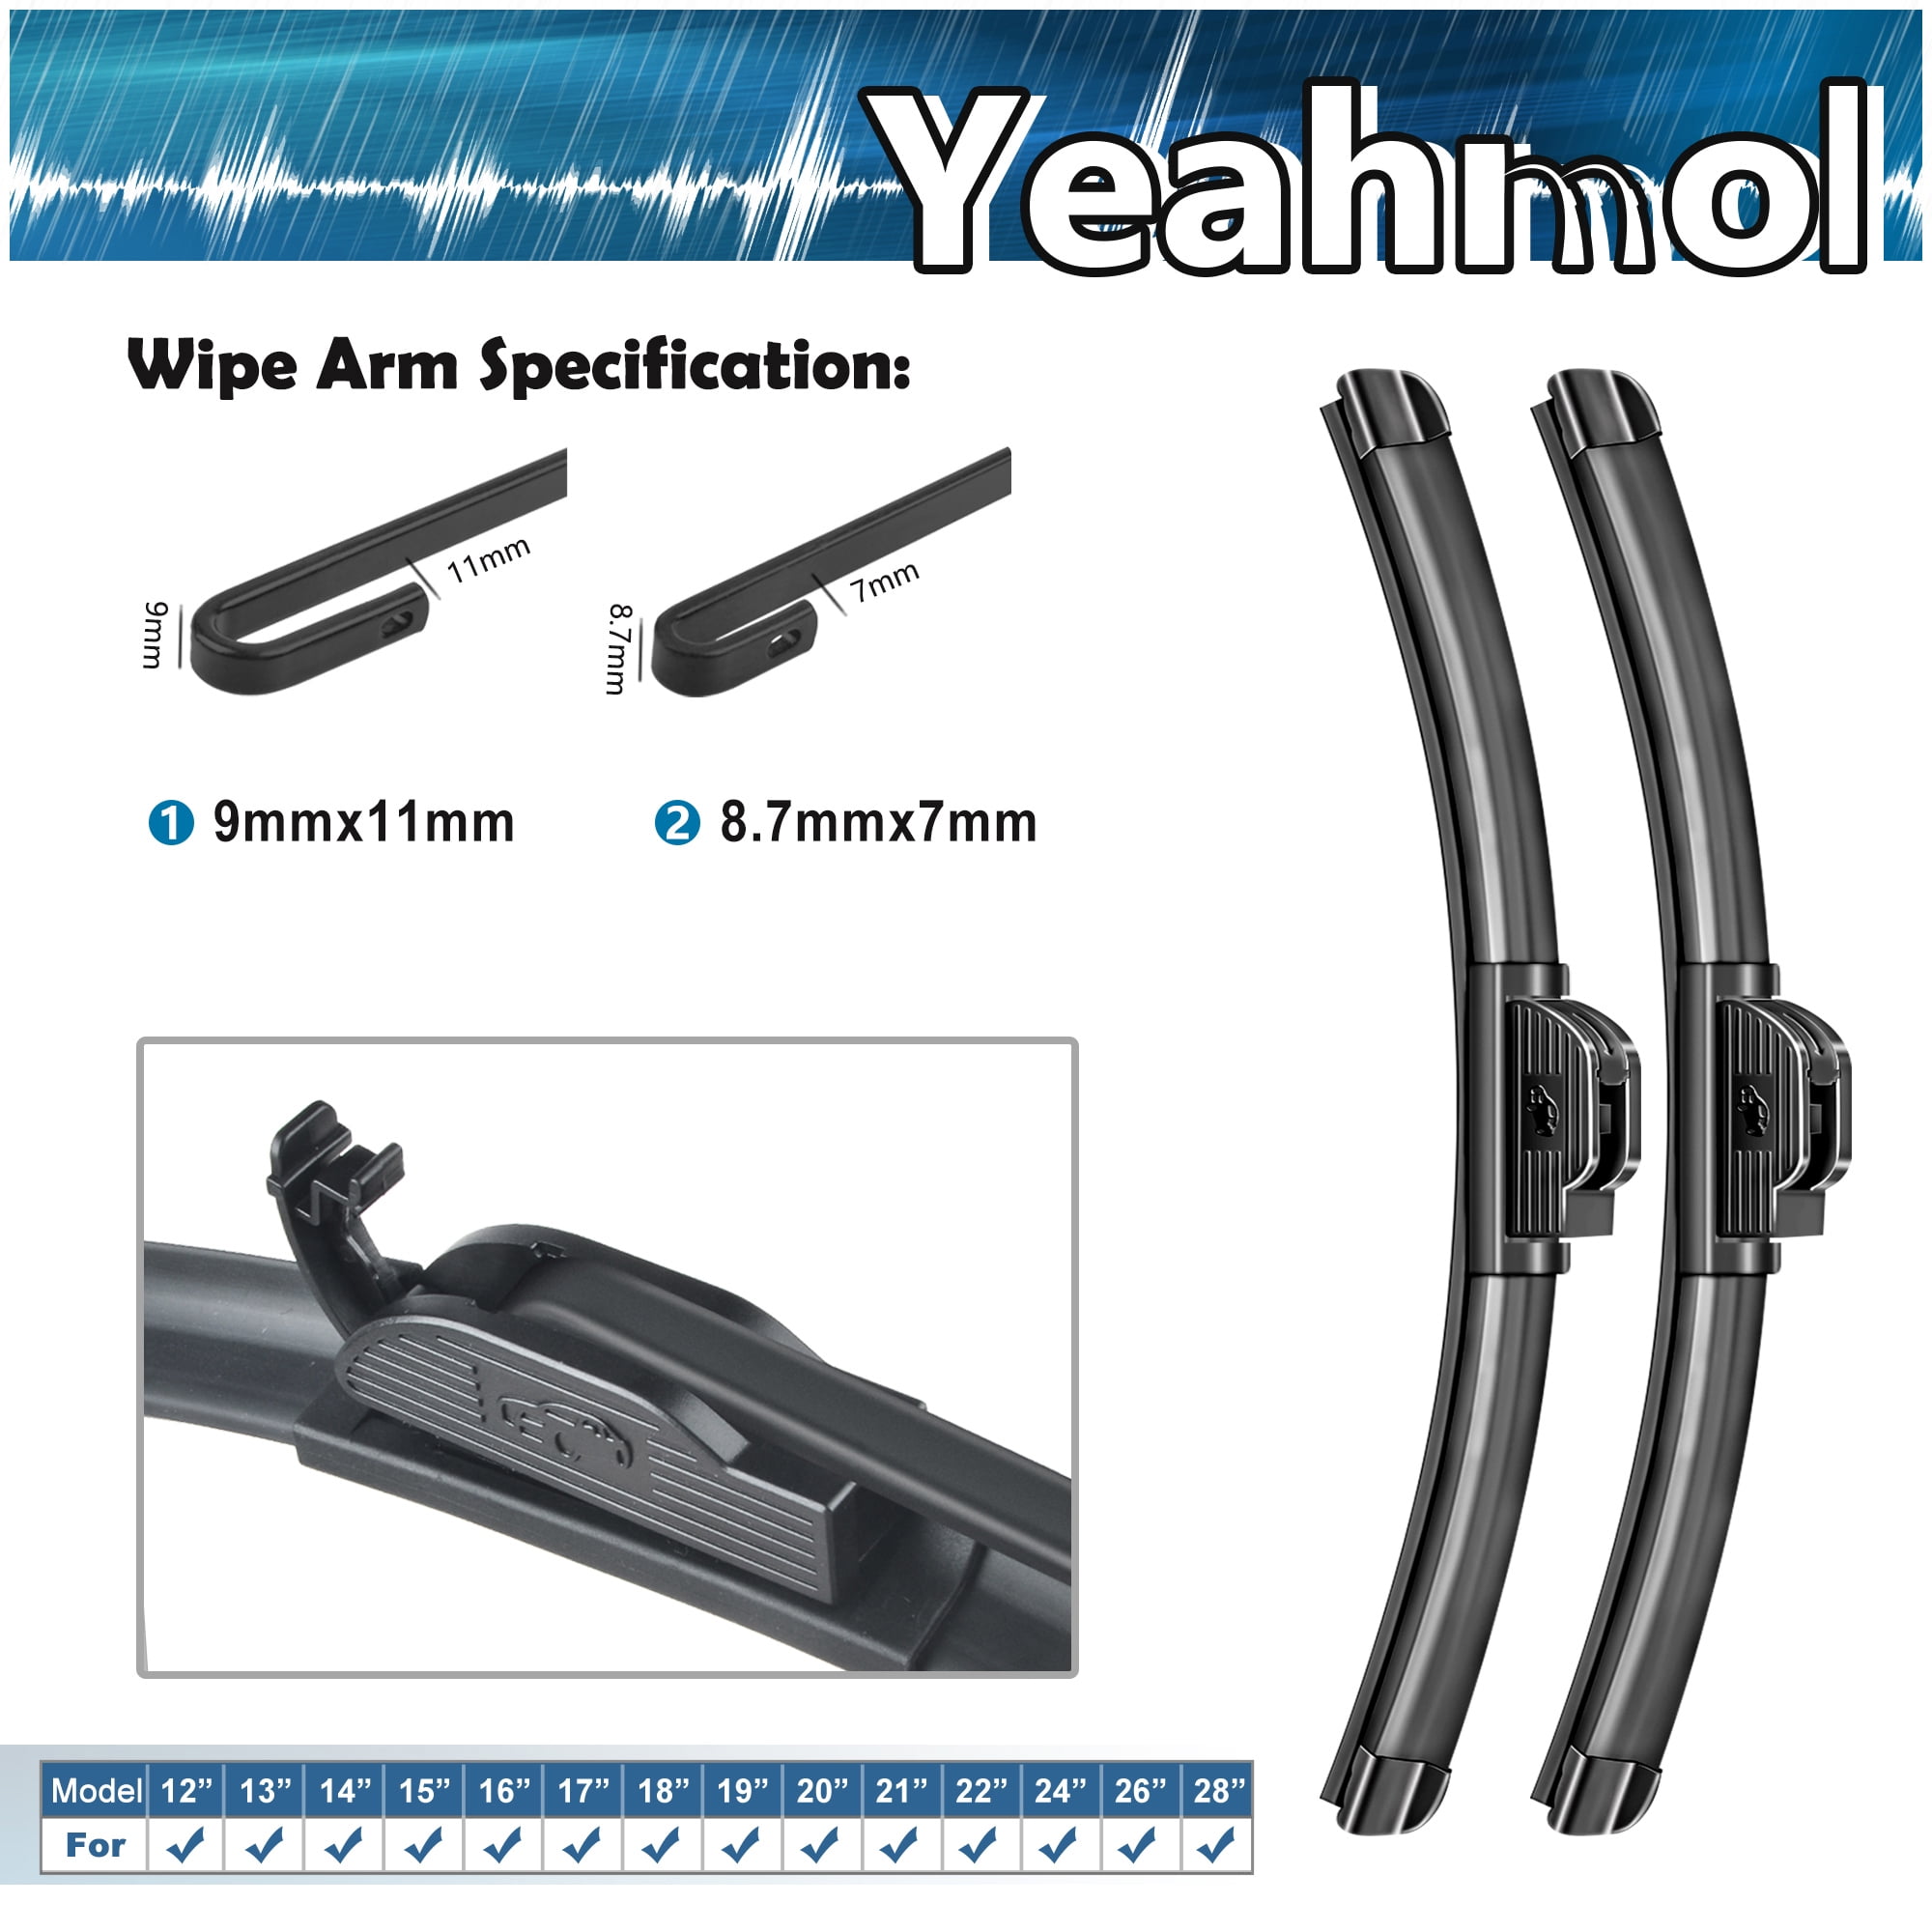 Yeahmol 22+18 Windshield Wiper Fit For Cadillac CT5 2021 22 Inch + 18  Inch Replacement Brackeltess Wiper Blades for Car Windshield U/J hook Wiper  Arms (Set of 2), H1H731M 